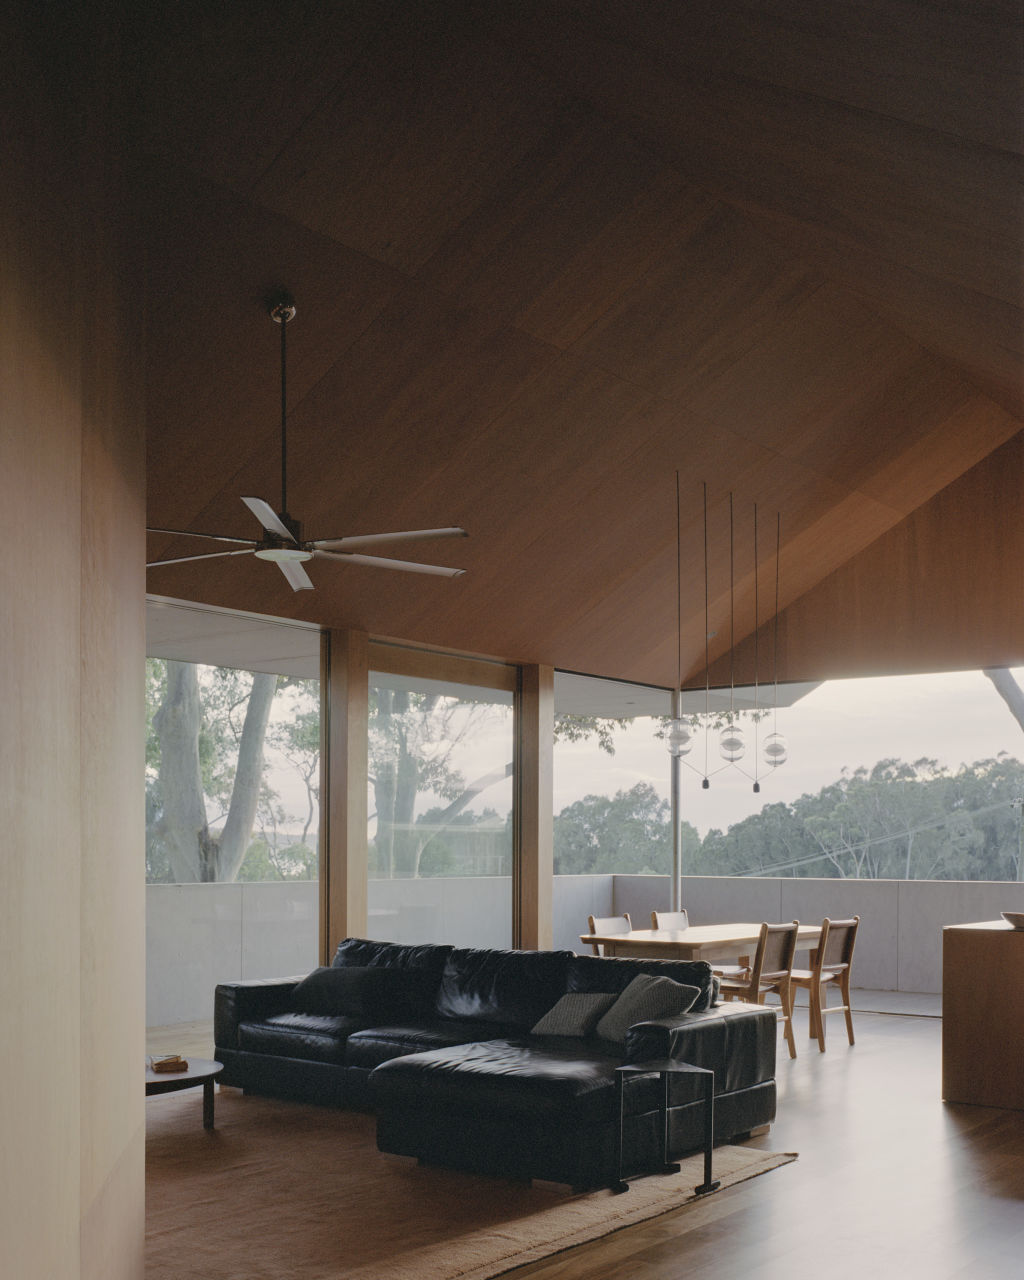 The living, dining and kitchen areas sit under raked five-metre ceilings. Photo: Rory Gardiner